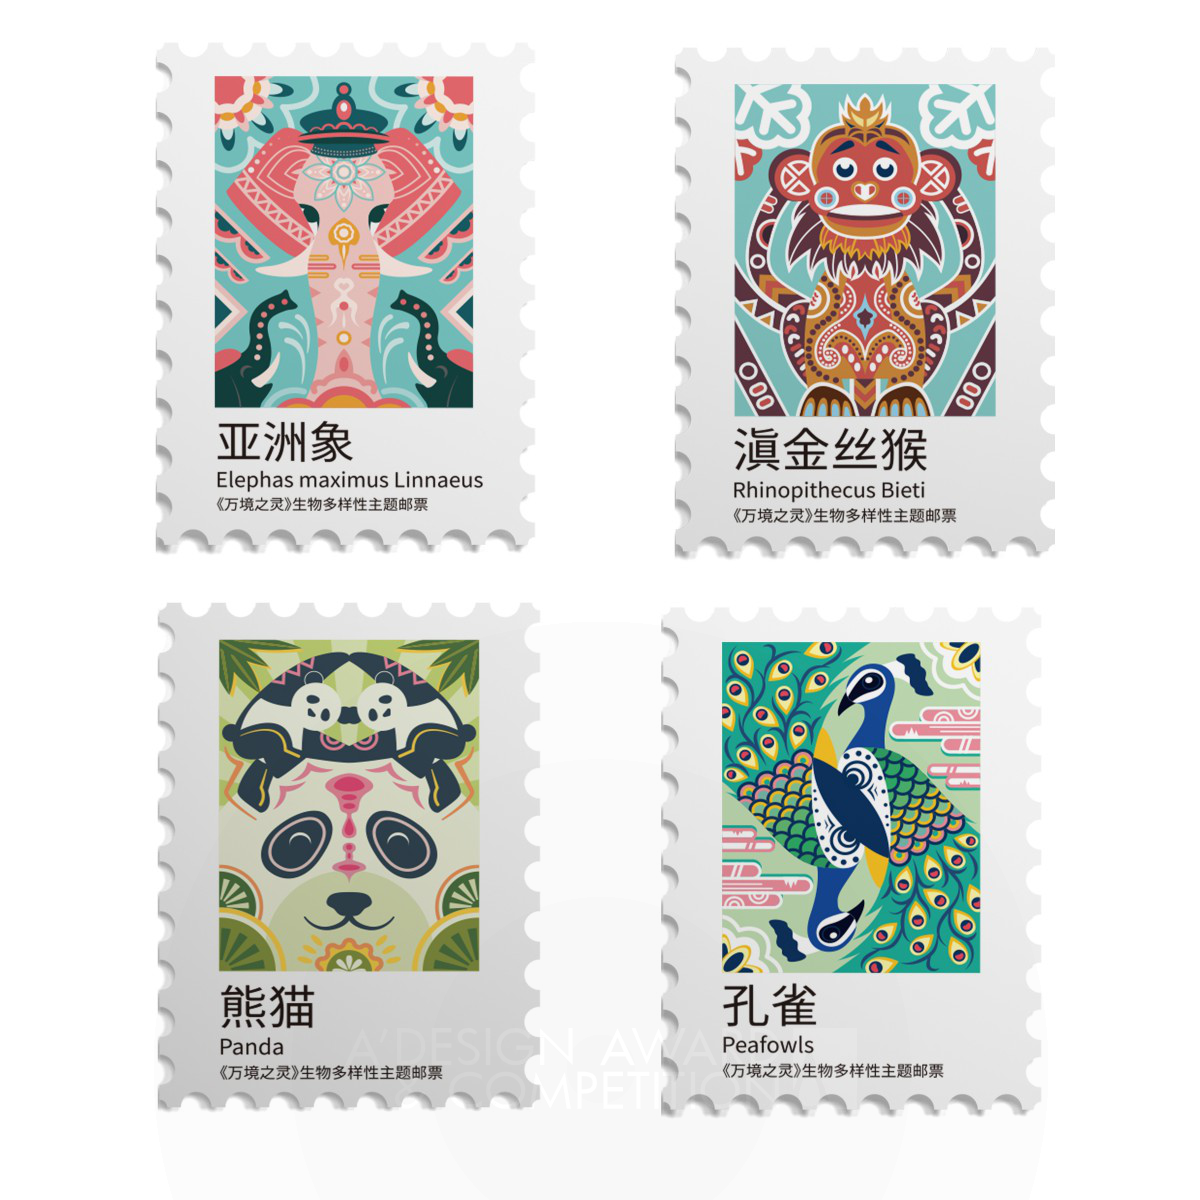 WEIWEI ZHANG wins Silver at the prestigious A' Graphics, Illustration and Visual Communication Design Award with Animal Deadee Stamp Illustration .